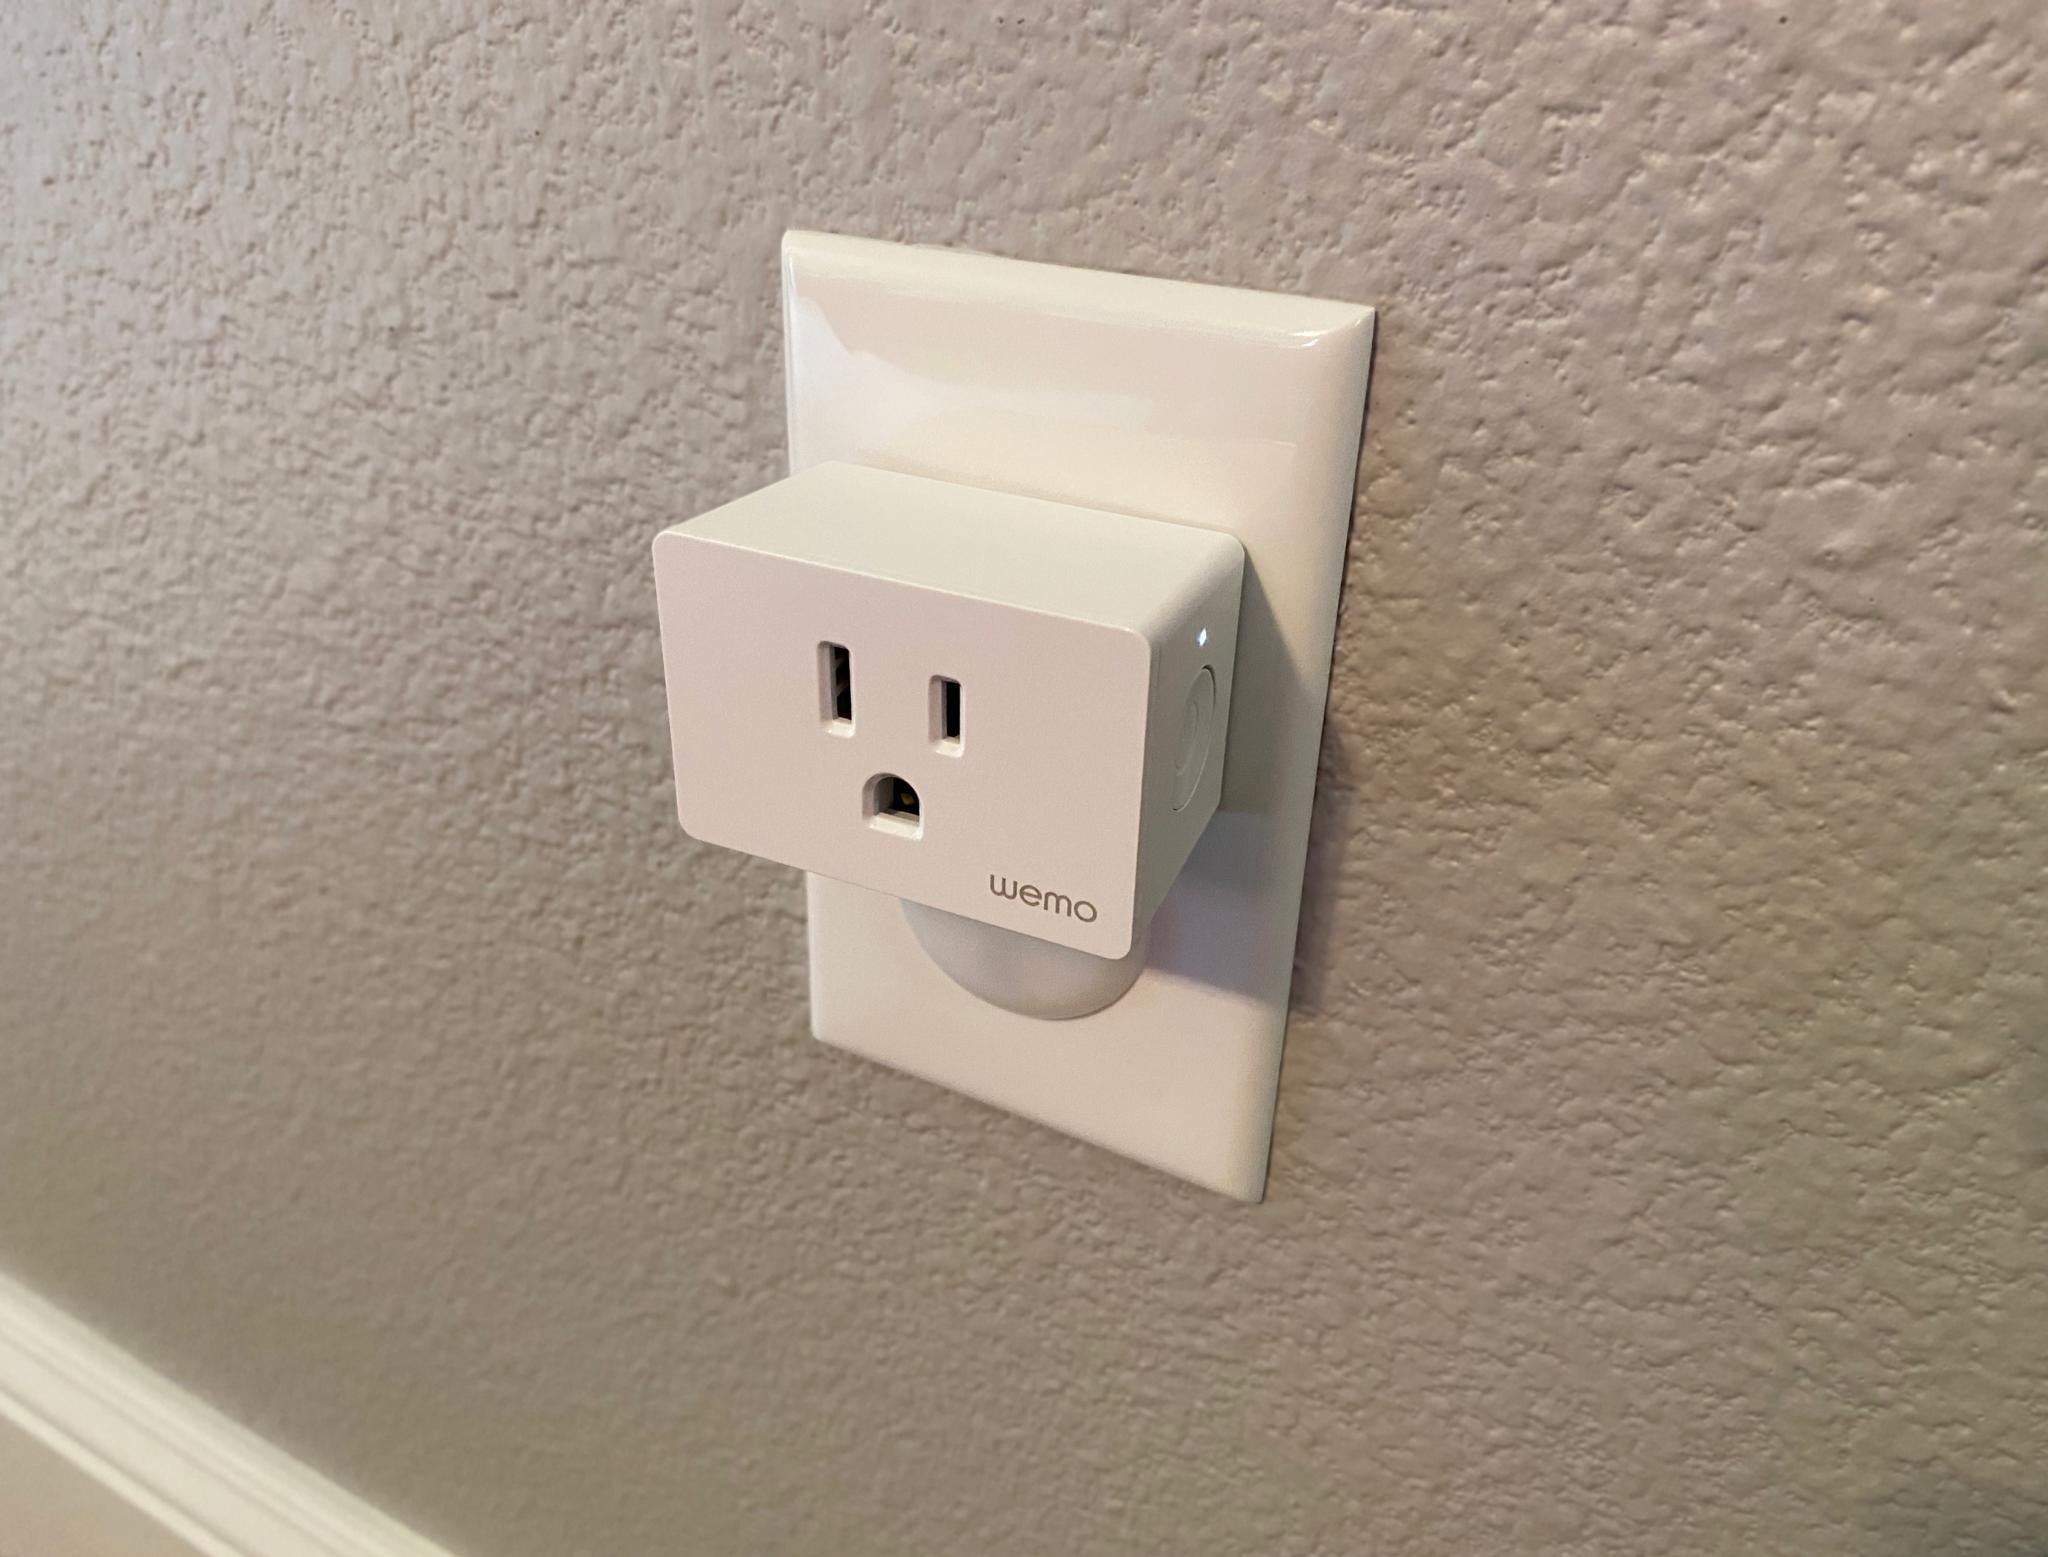 Wemo Wifi Smart Plug installed on an outlet